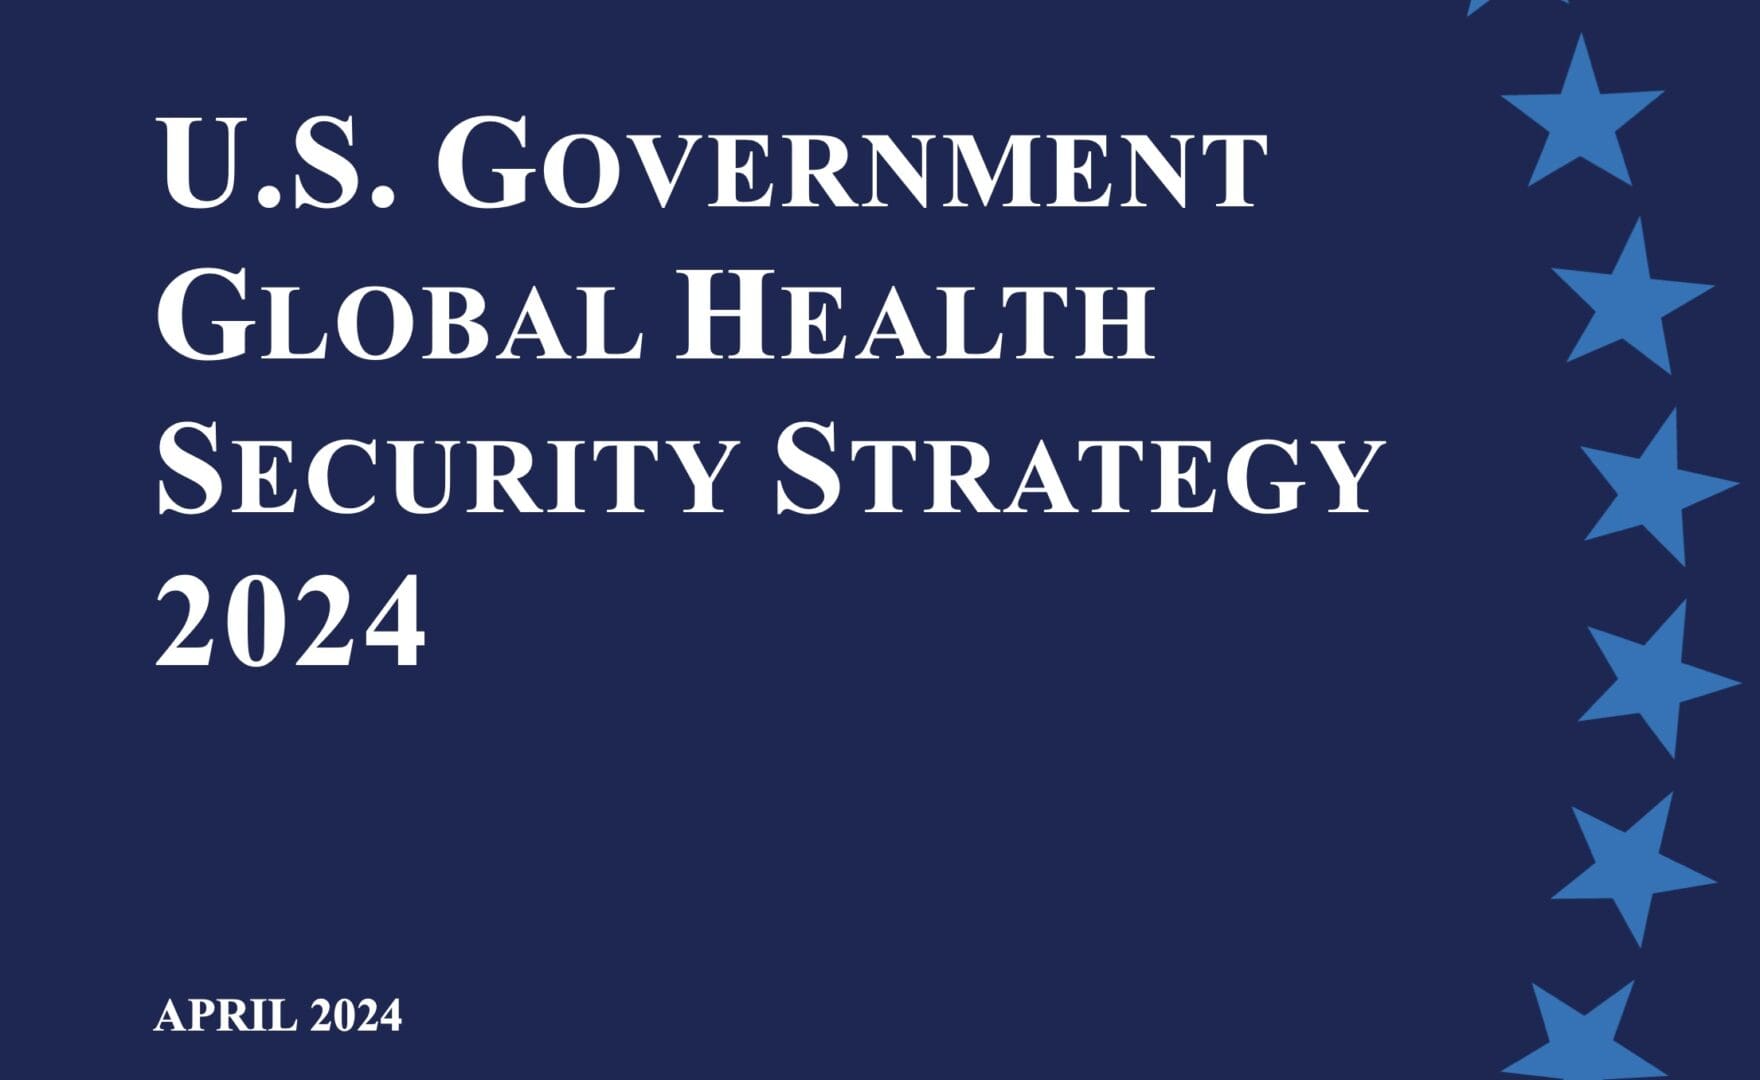 US government global health security strategy 2024.